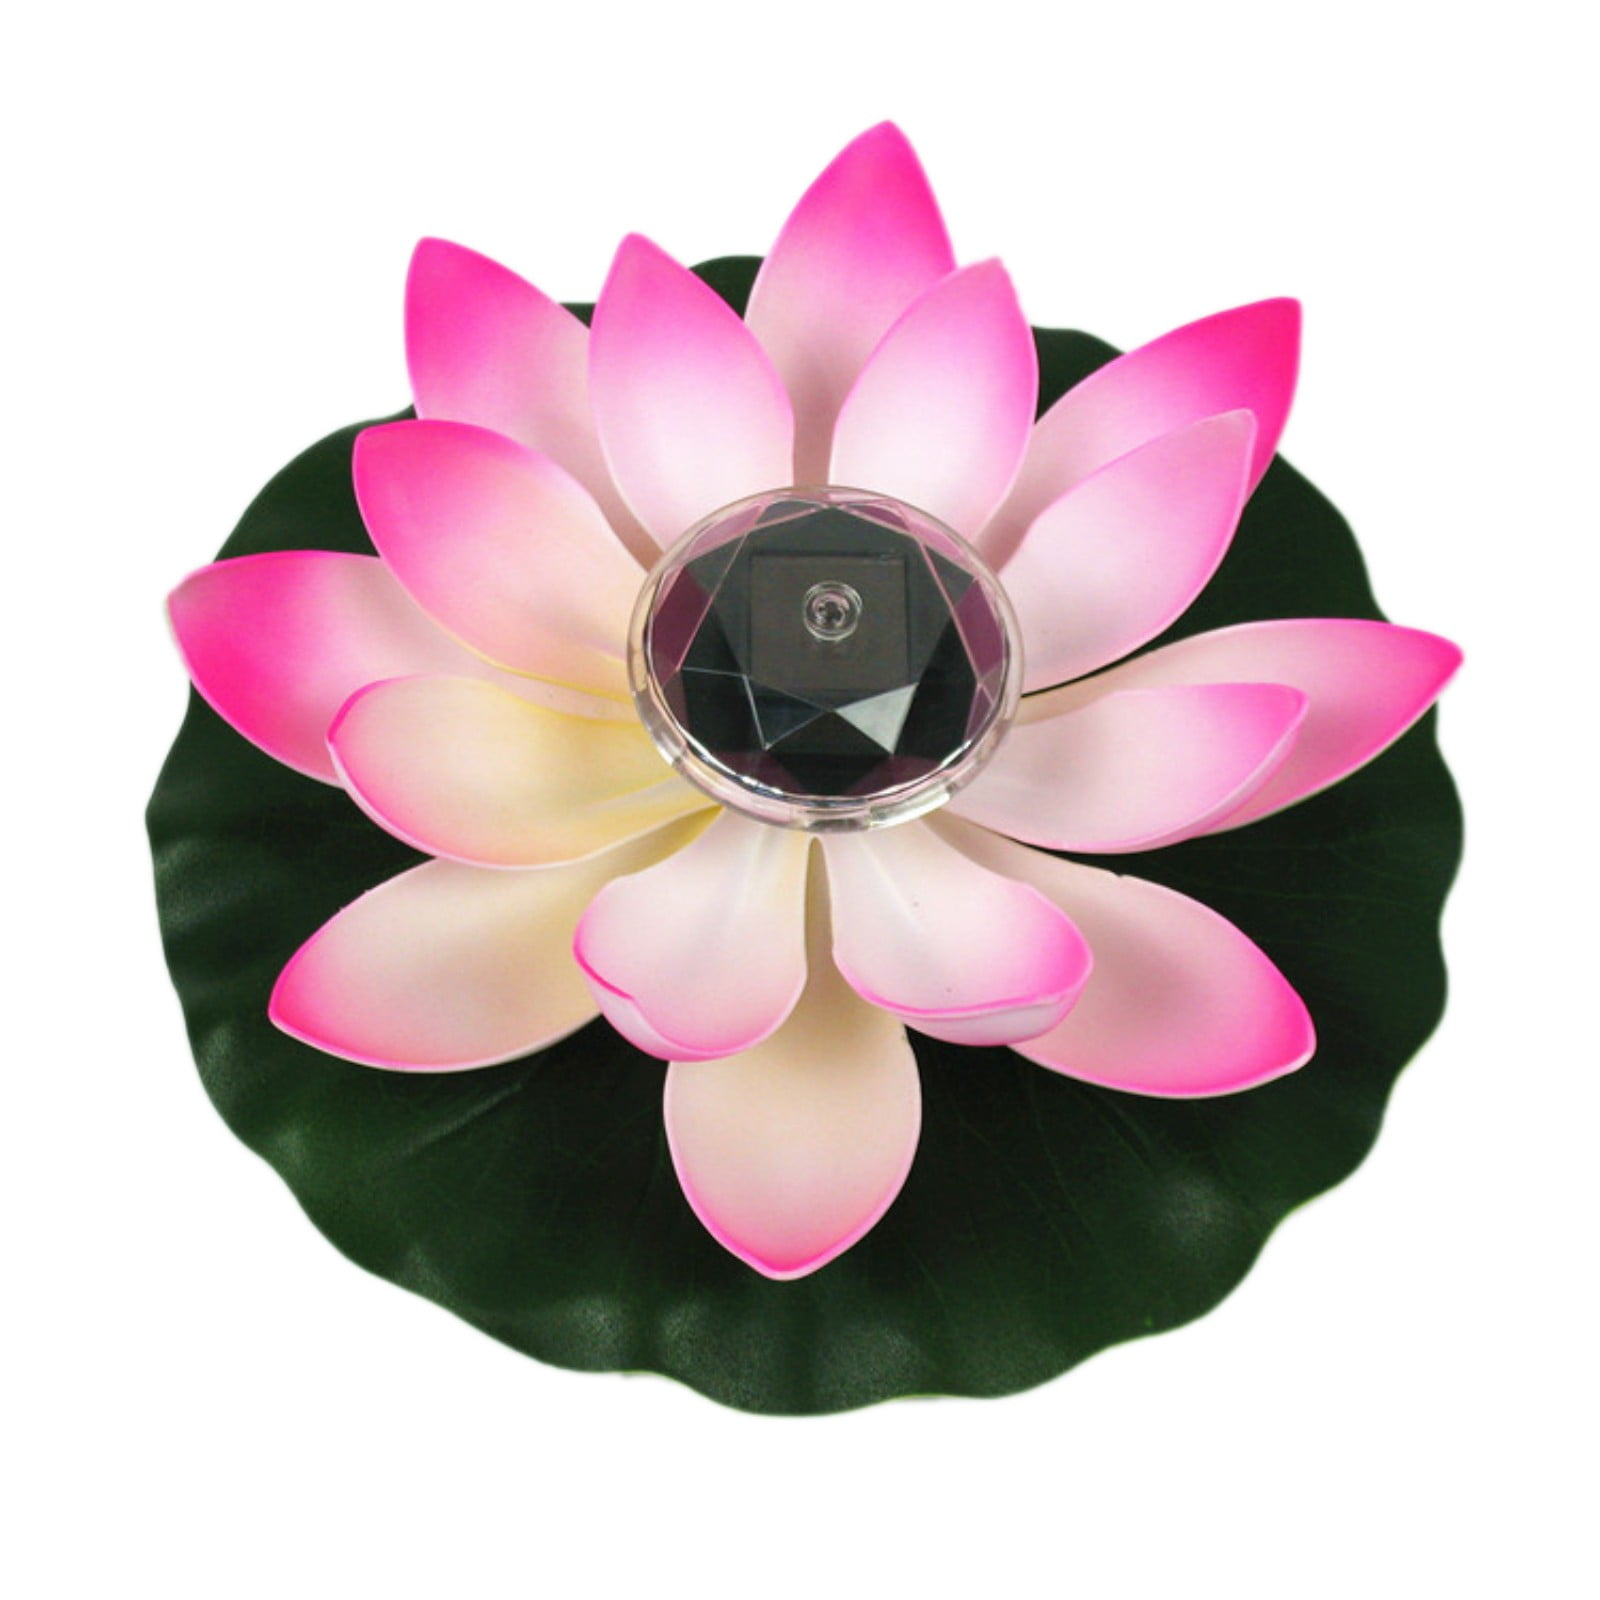 Details about   Floating Lotus Flower Lamp Lights Pool Garden Decor Water 8 LED Gift Wedding New 